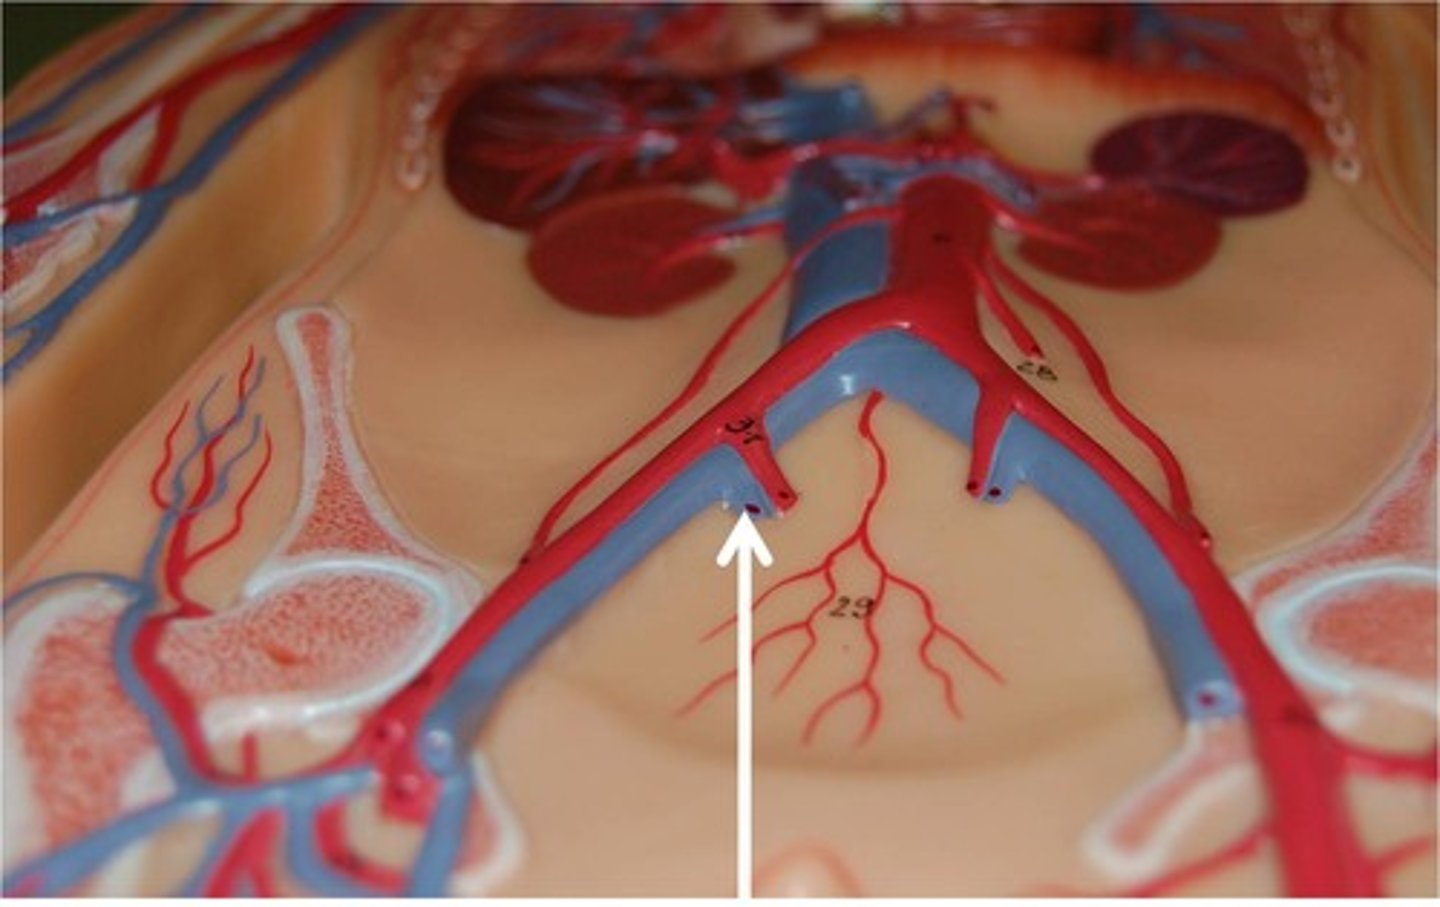 <p>These arteries branch dorsally off the aorta, immediately anterior to the umbilical arteries. They carry blood to the pelvic region.</p>